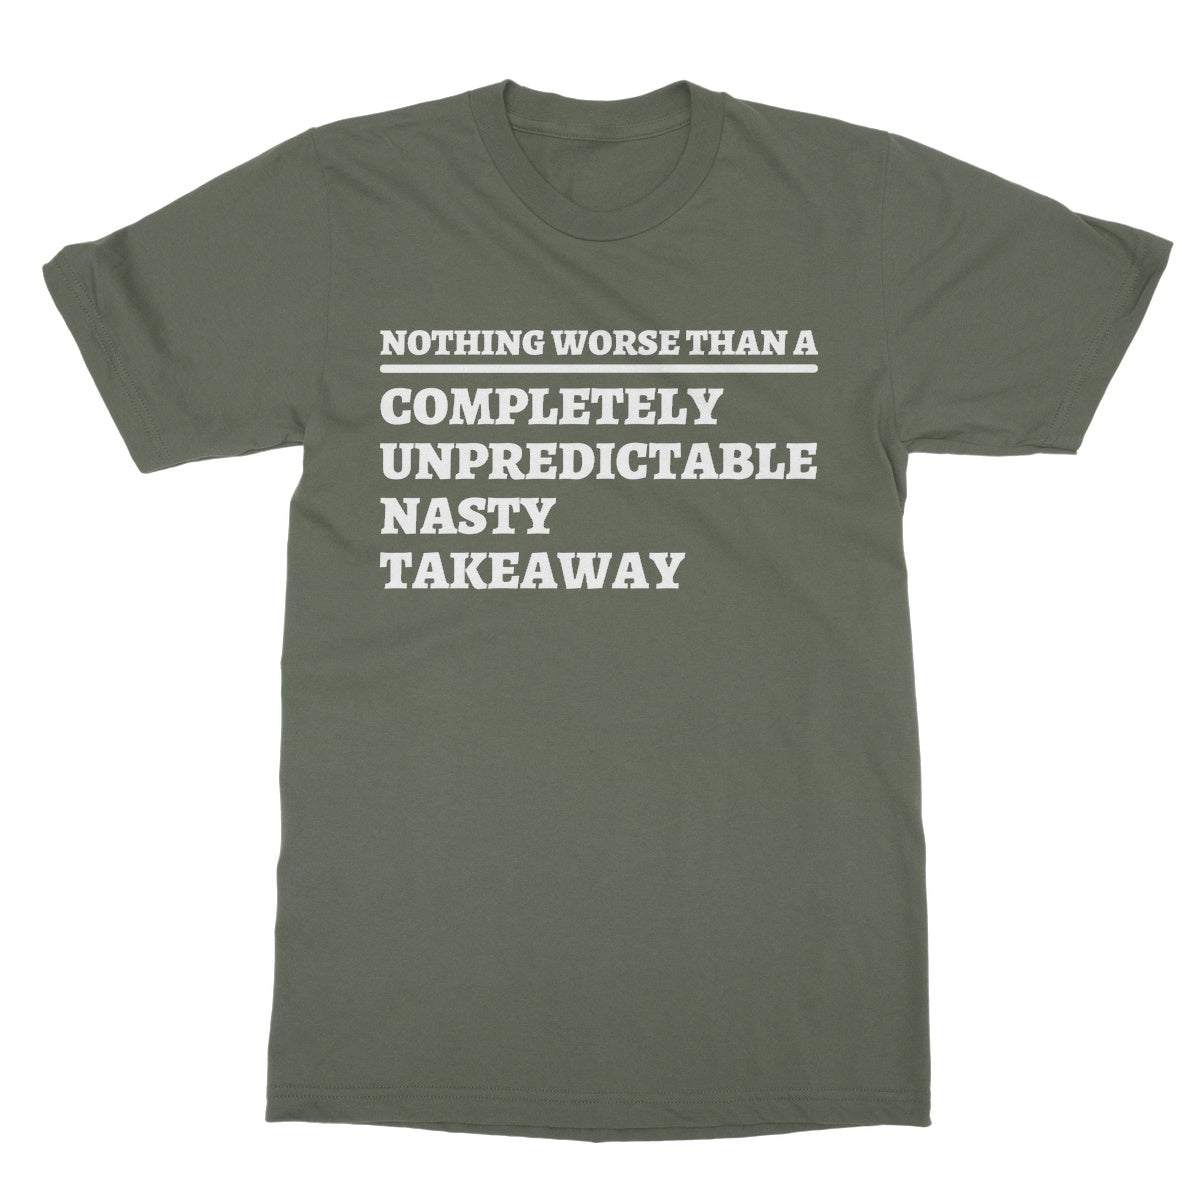 completely unreliable nasty takeaway t shirt green